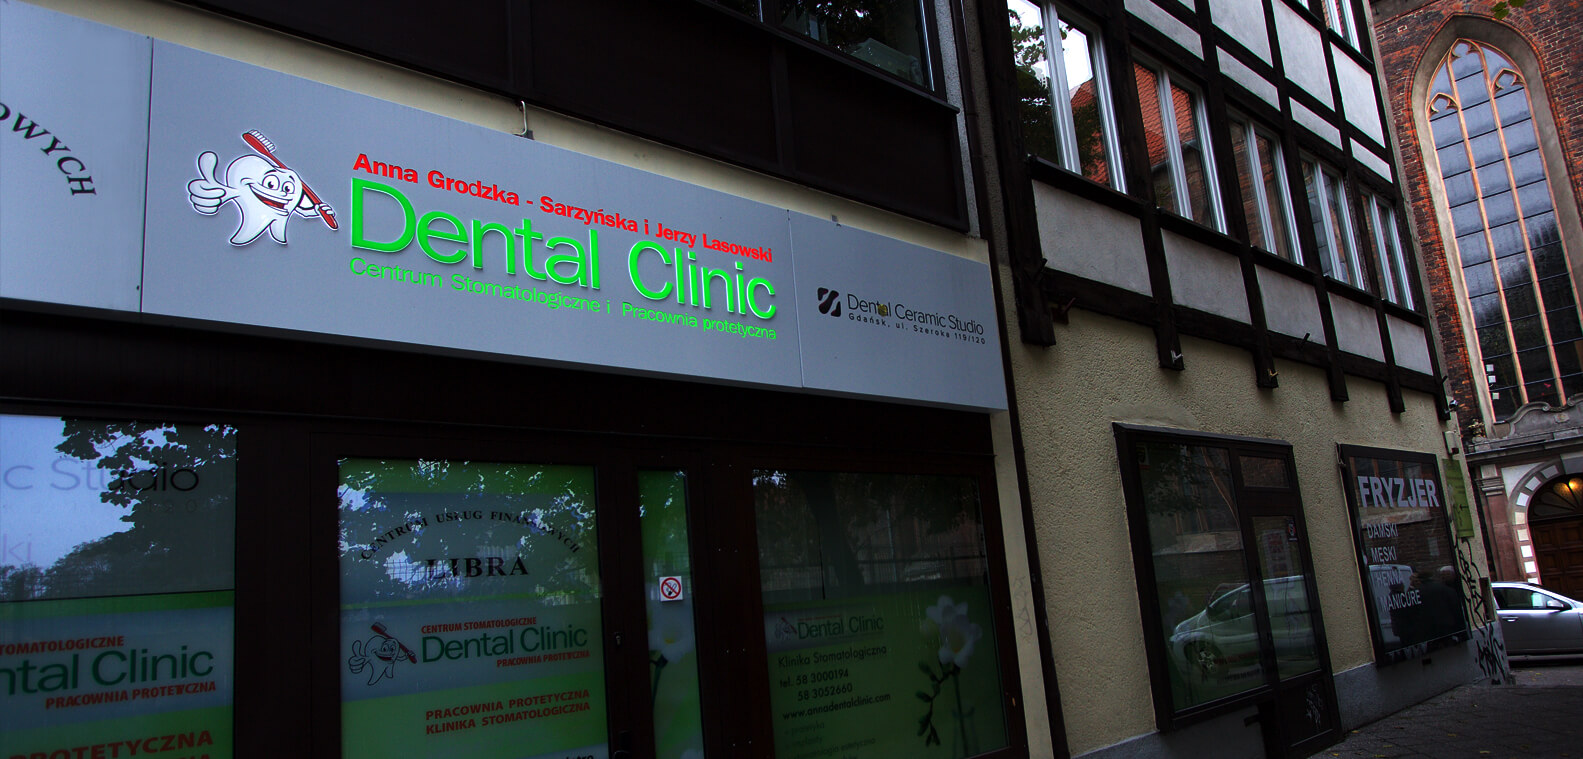 Dental Clinic - Dental Clinic - light box made of dibond with illuminated letters